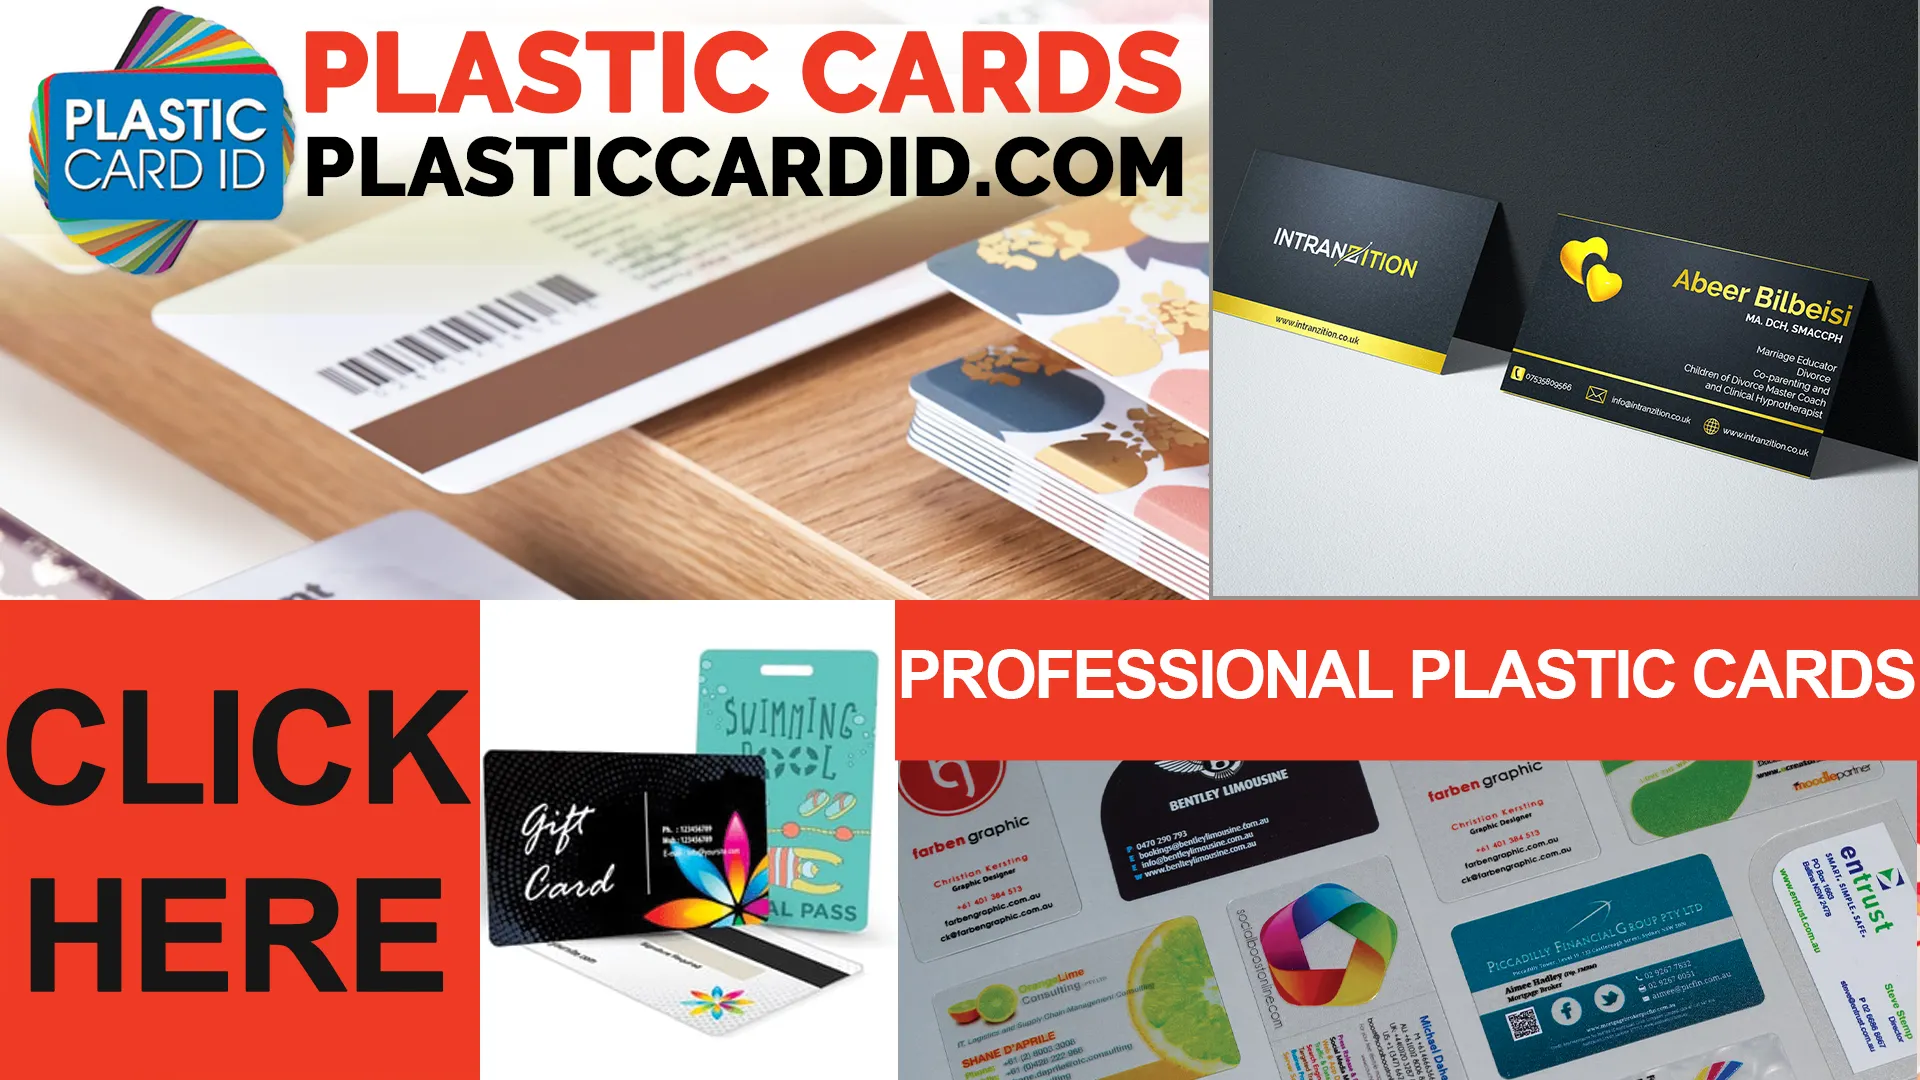 Revolutionizing Card Design with Innovative Die Cutting Techniques